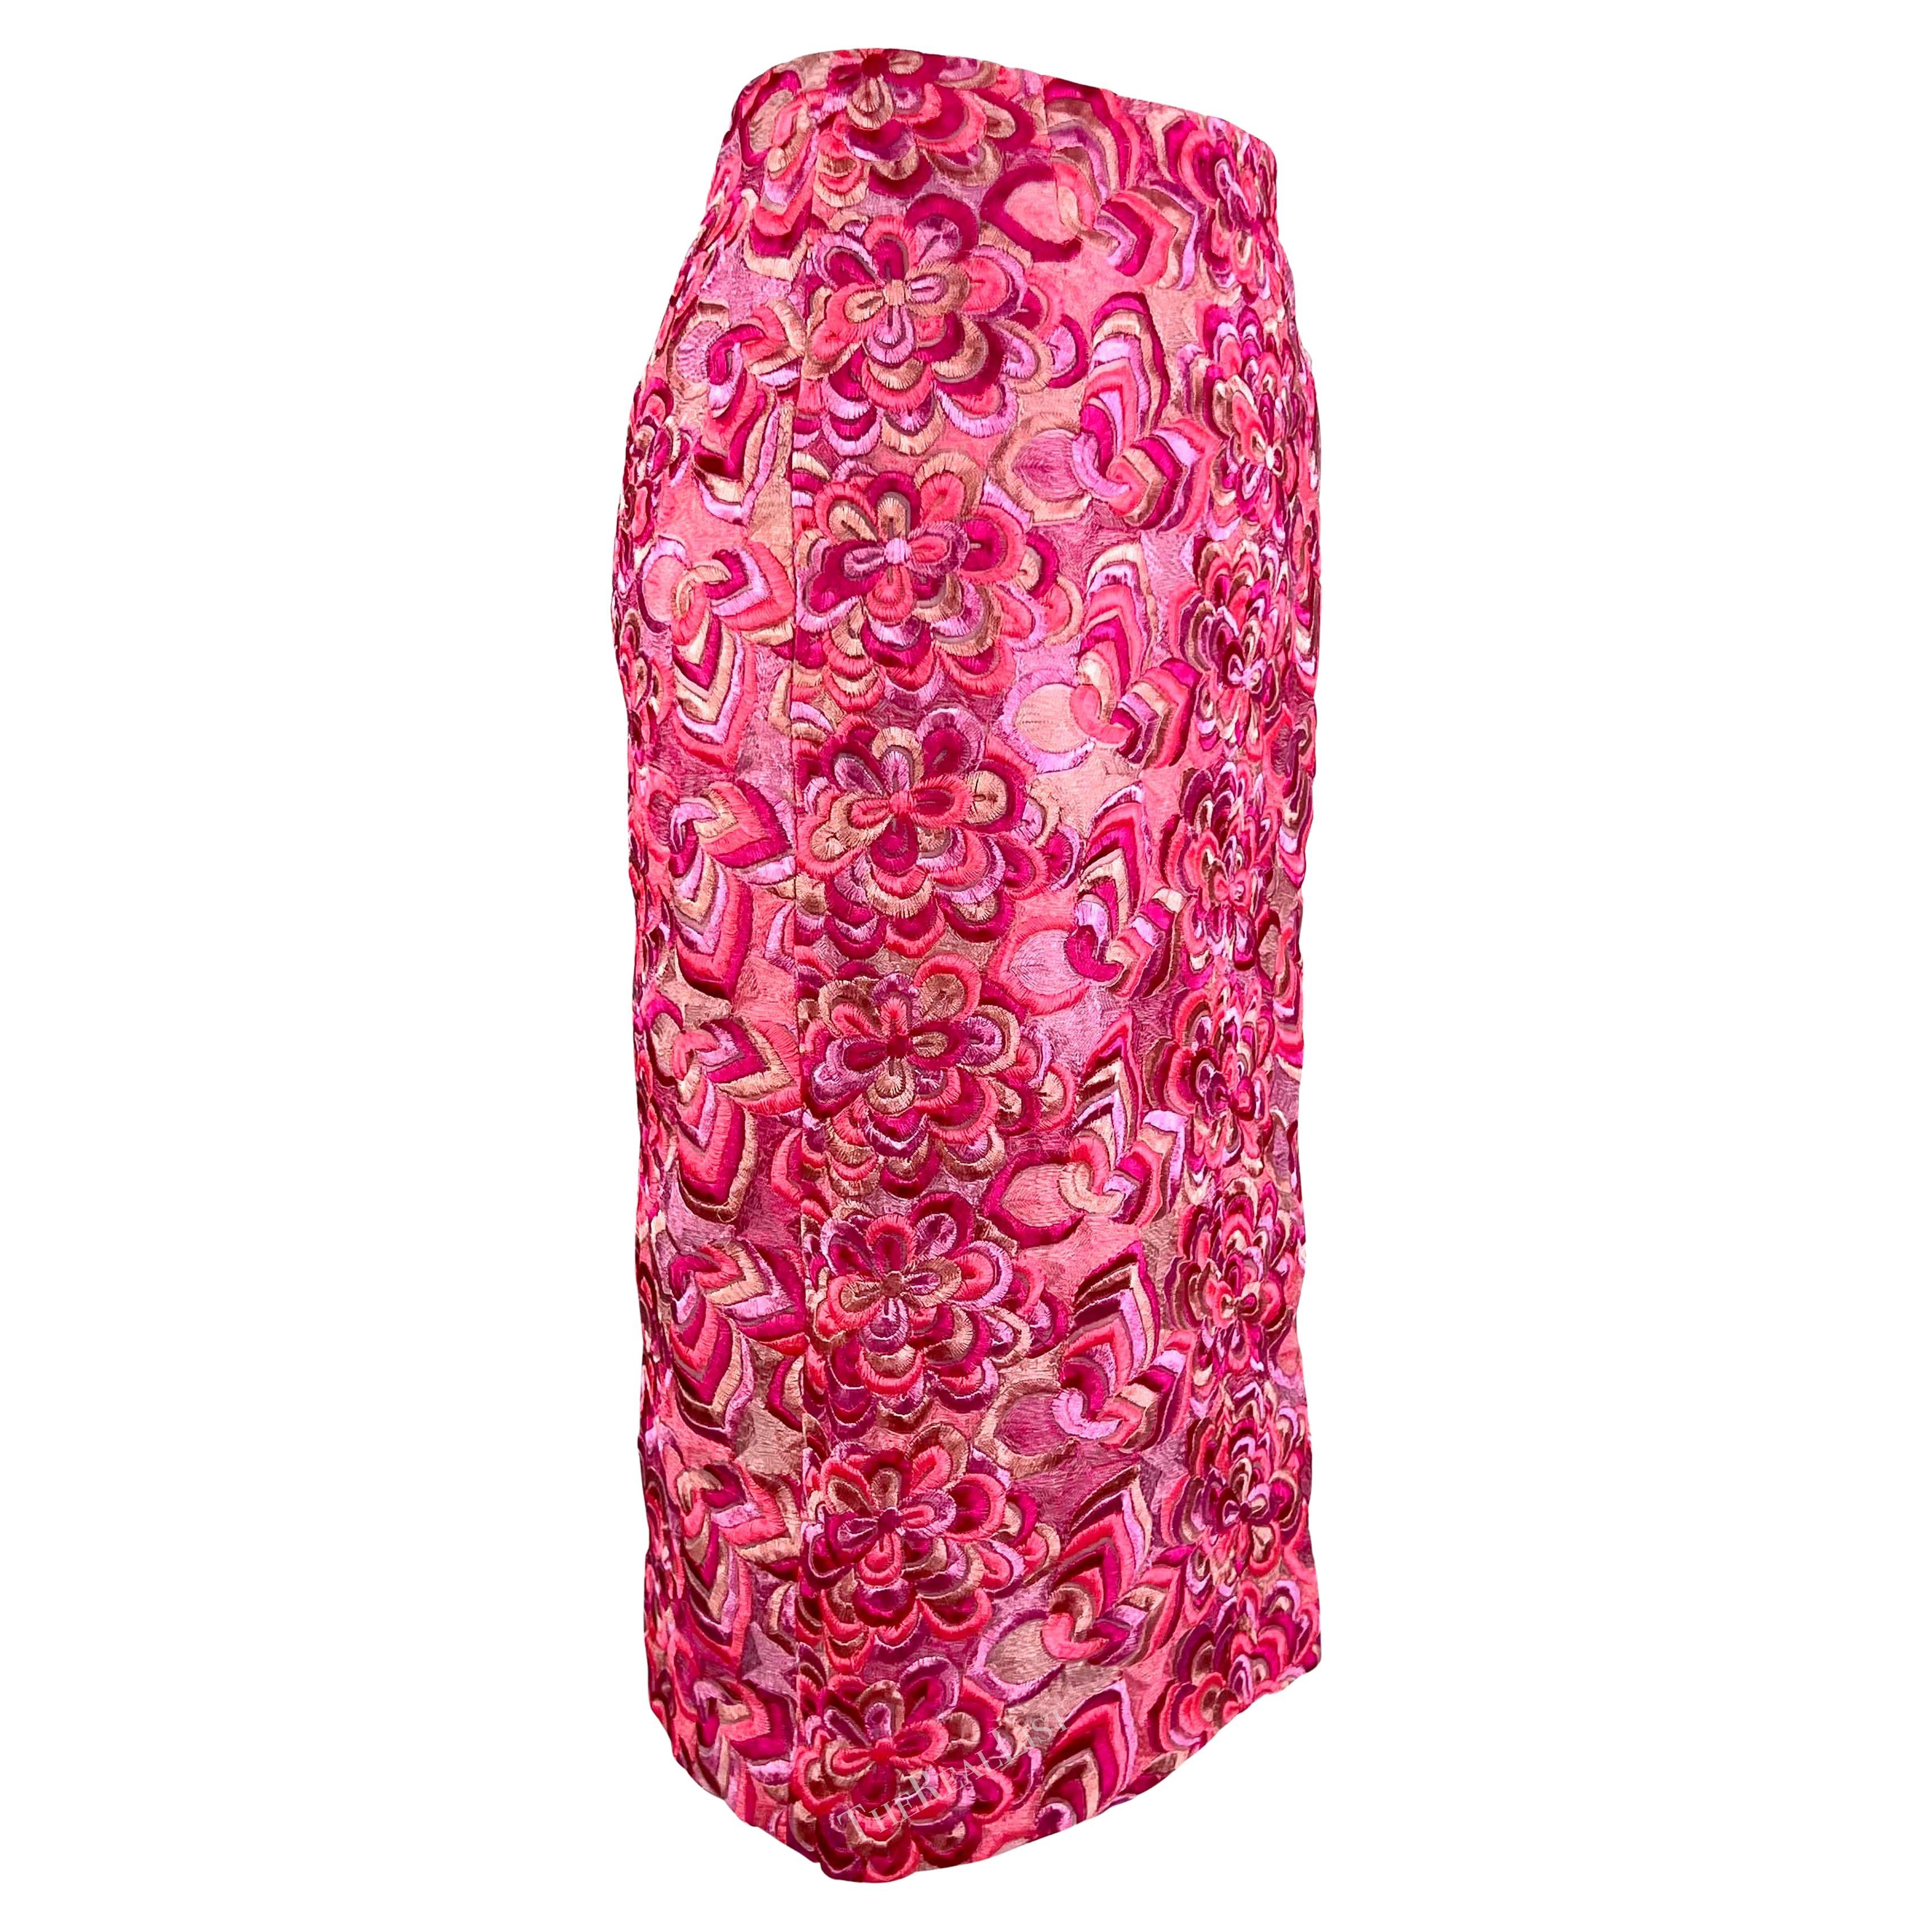 S/S 2000 Gianni Versace by Donatella Versace for Gianni Versace for Gianni Versace for Gianni Versace for Gianni Versace by Donatella Neon Pink Floral Embroidered Skirt en vente 3